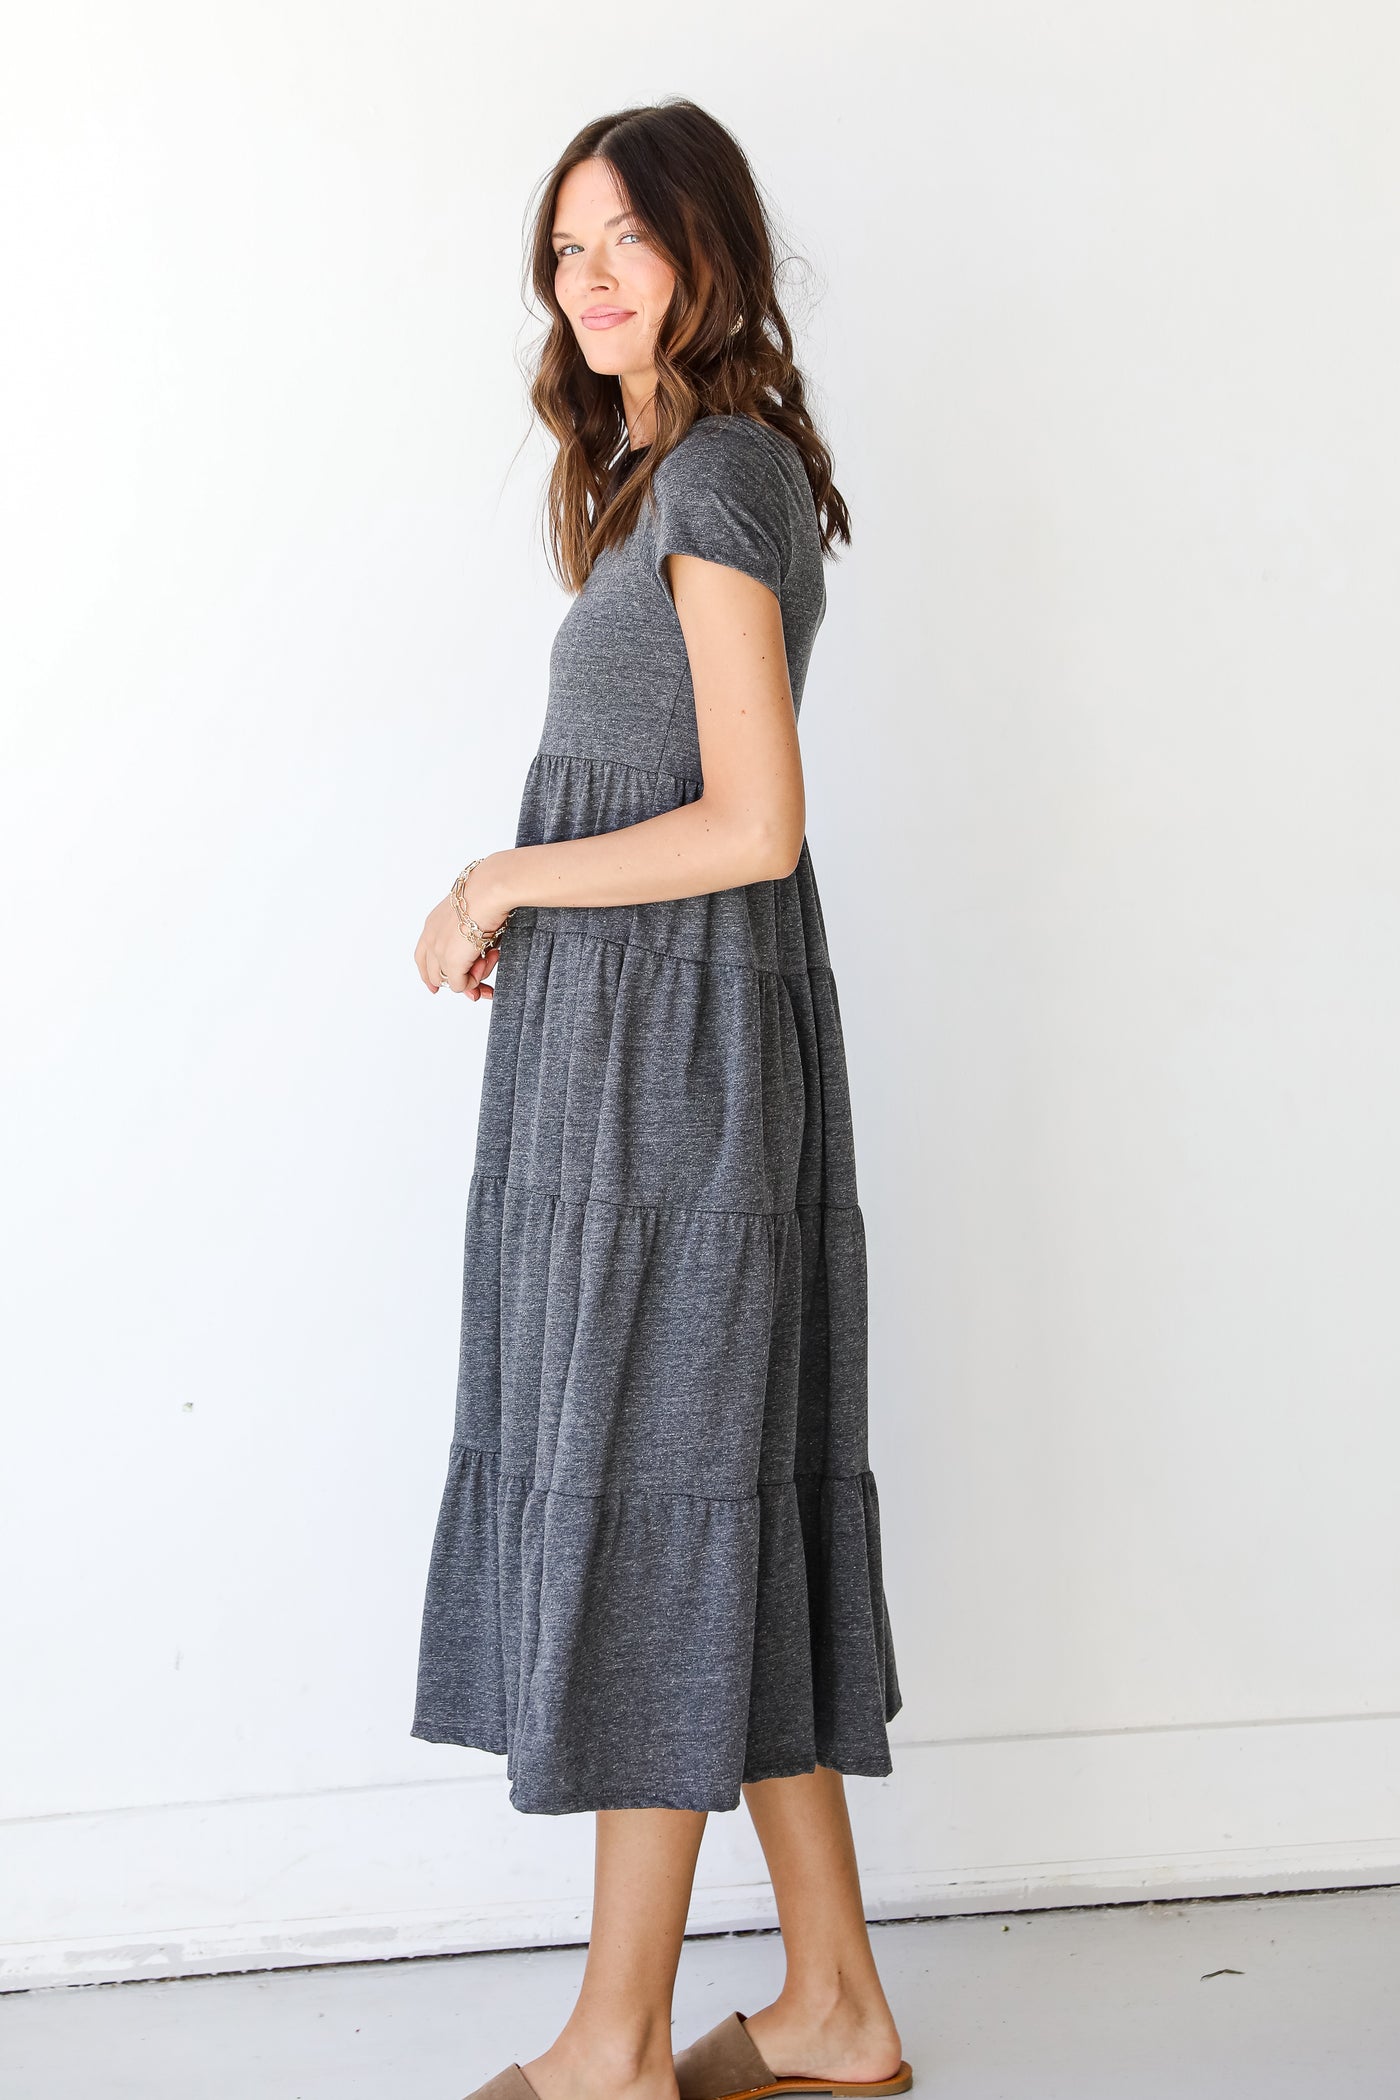 Tiered Maxi Dress in charcoal side view